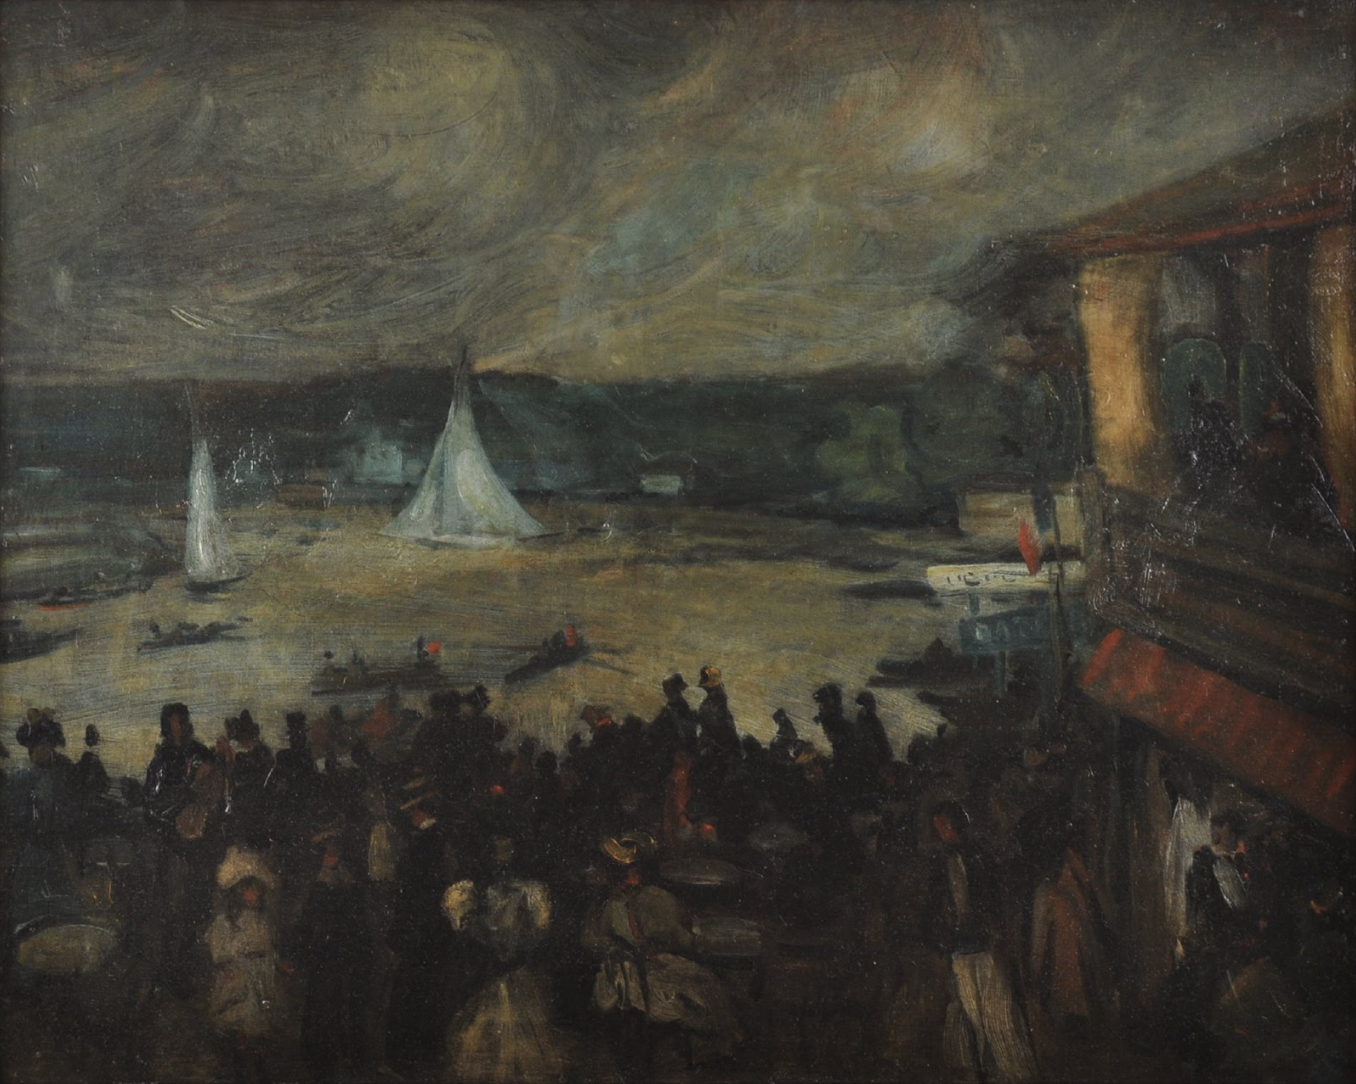 Glackens painting